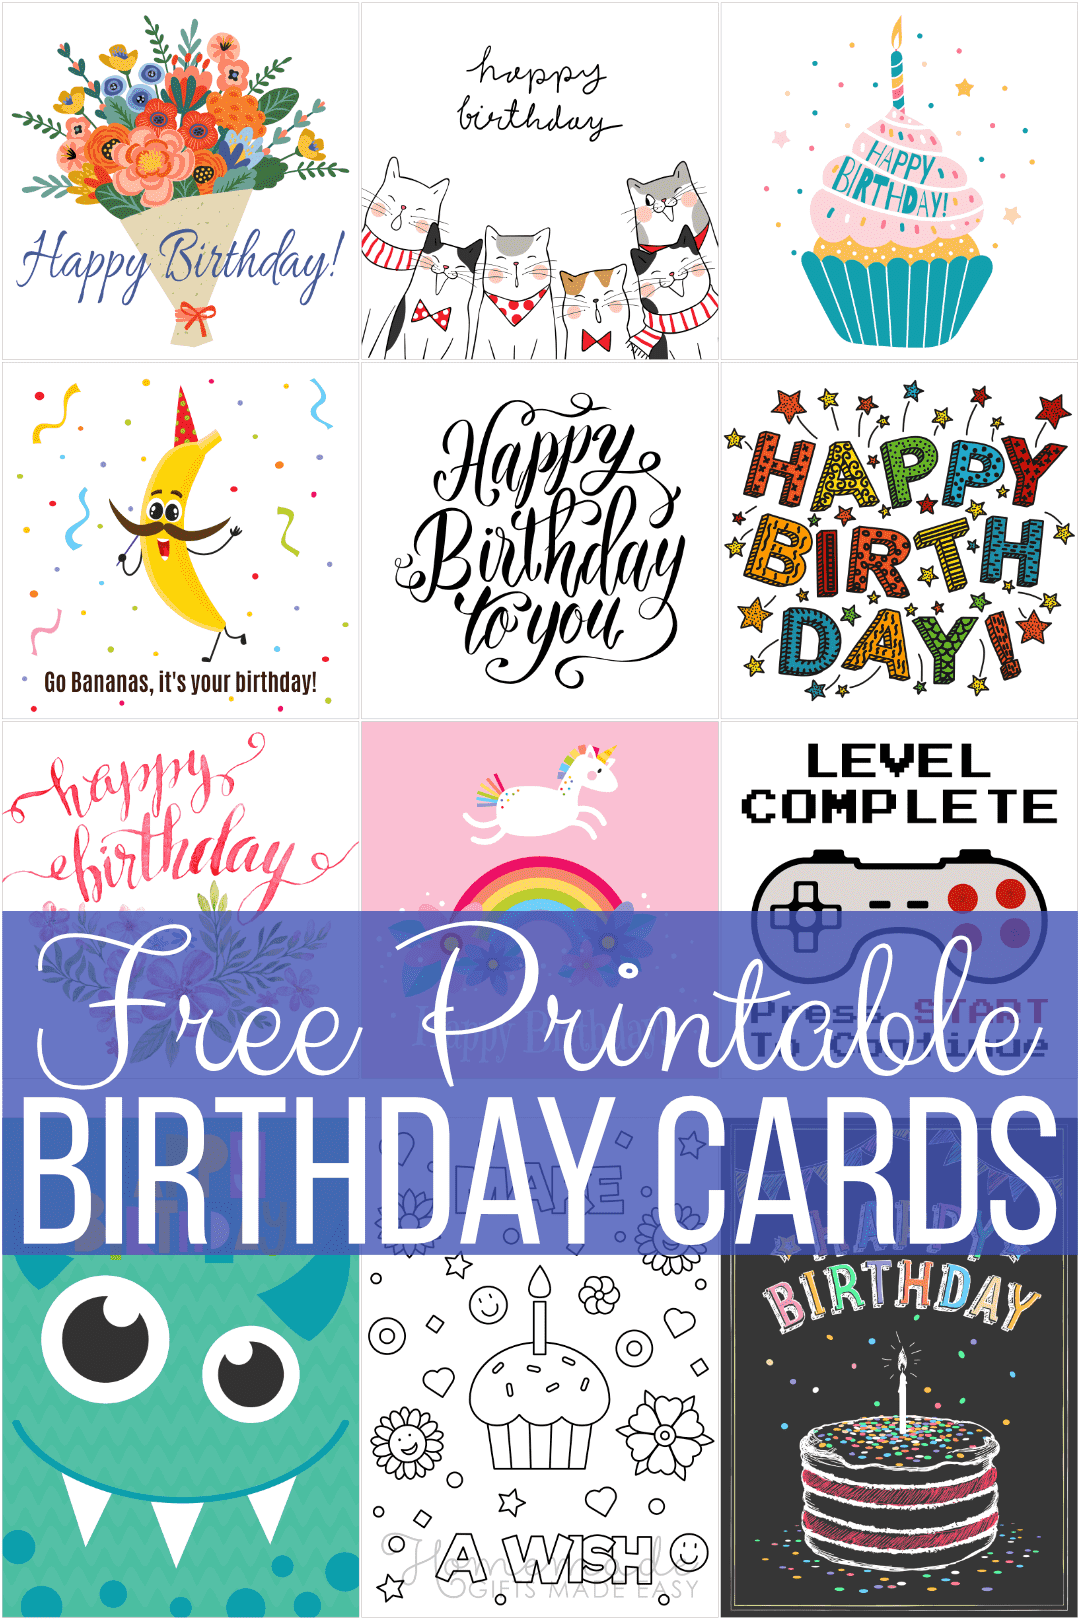 Digital Birthday card 7*5 inches for download Printable Birthday card Funny Birthday Card Instant download Birthday card